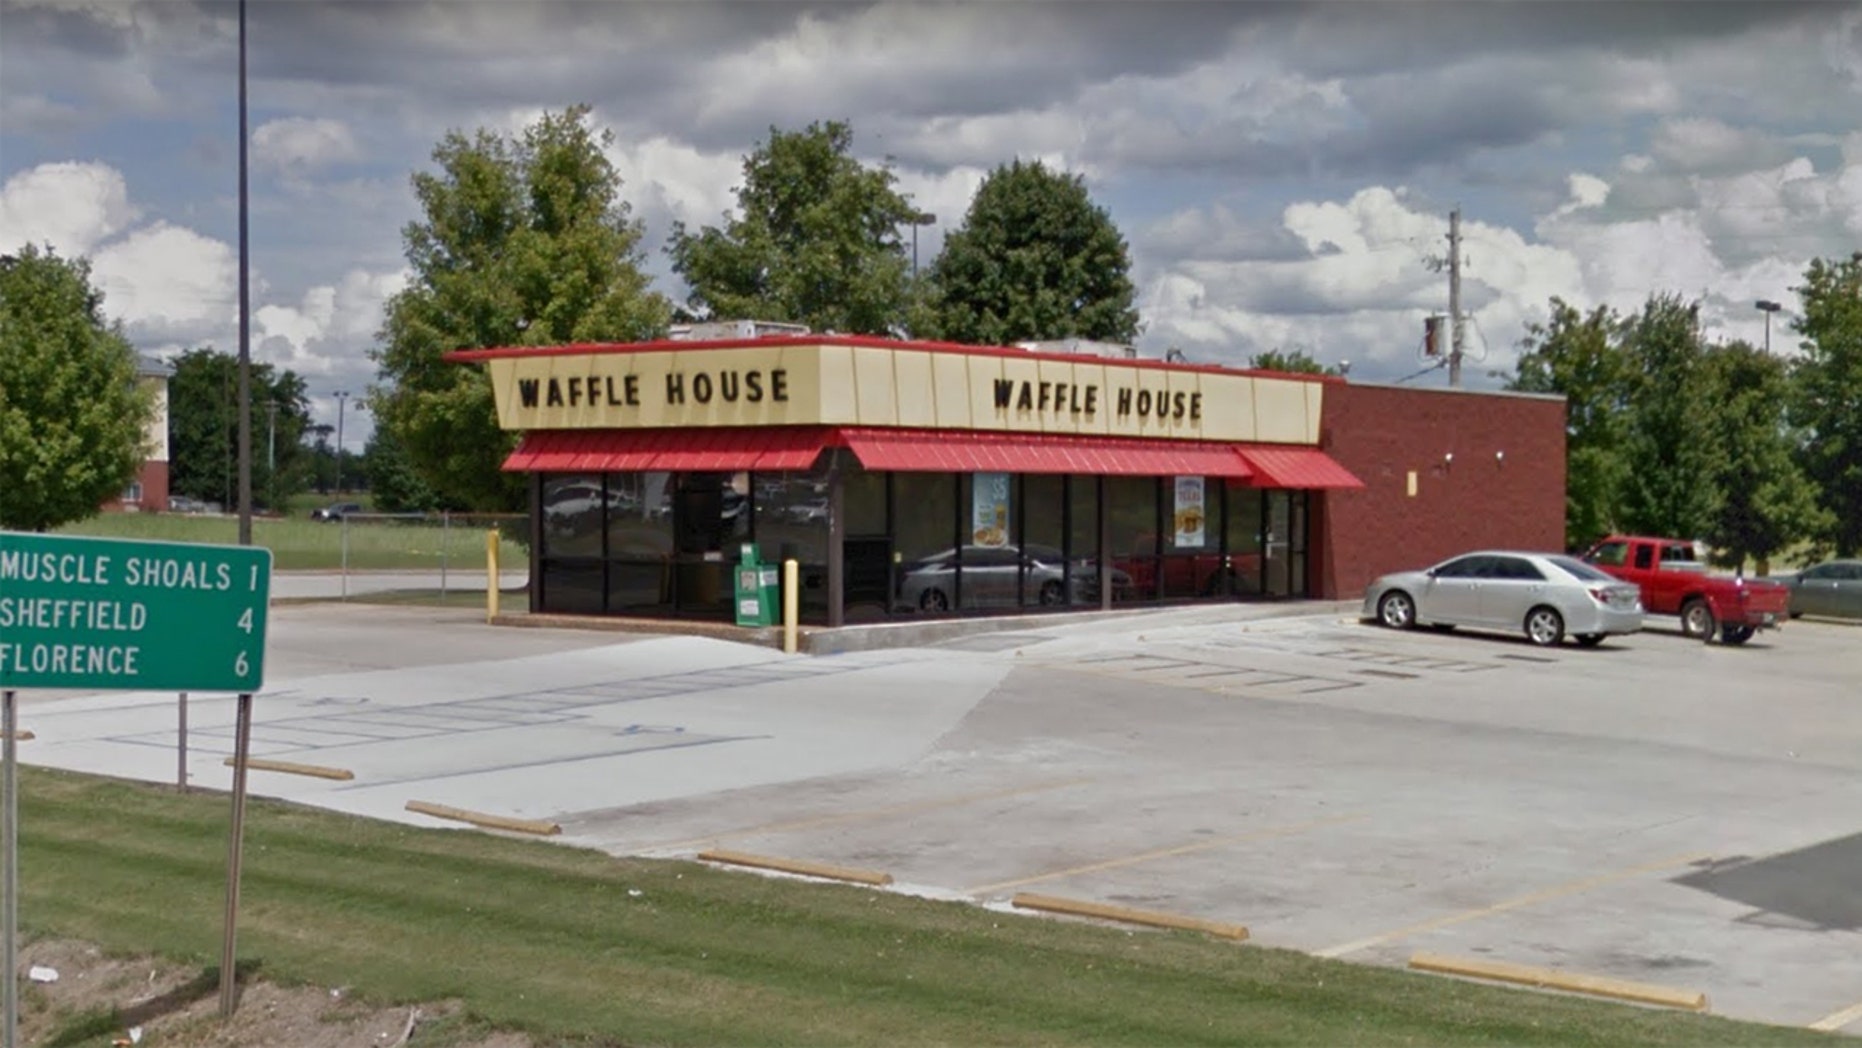 The Waffle House, located in Tuscumbia, Ala., is said to have suffered extensive damage.